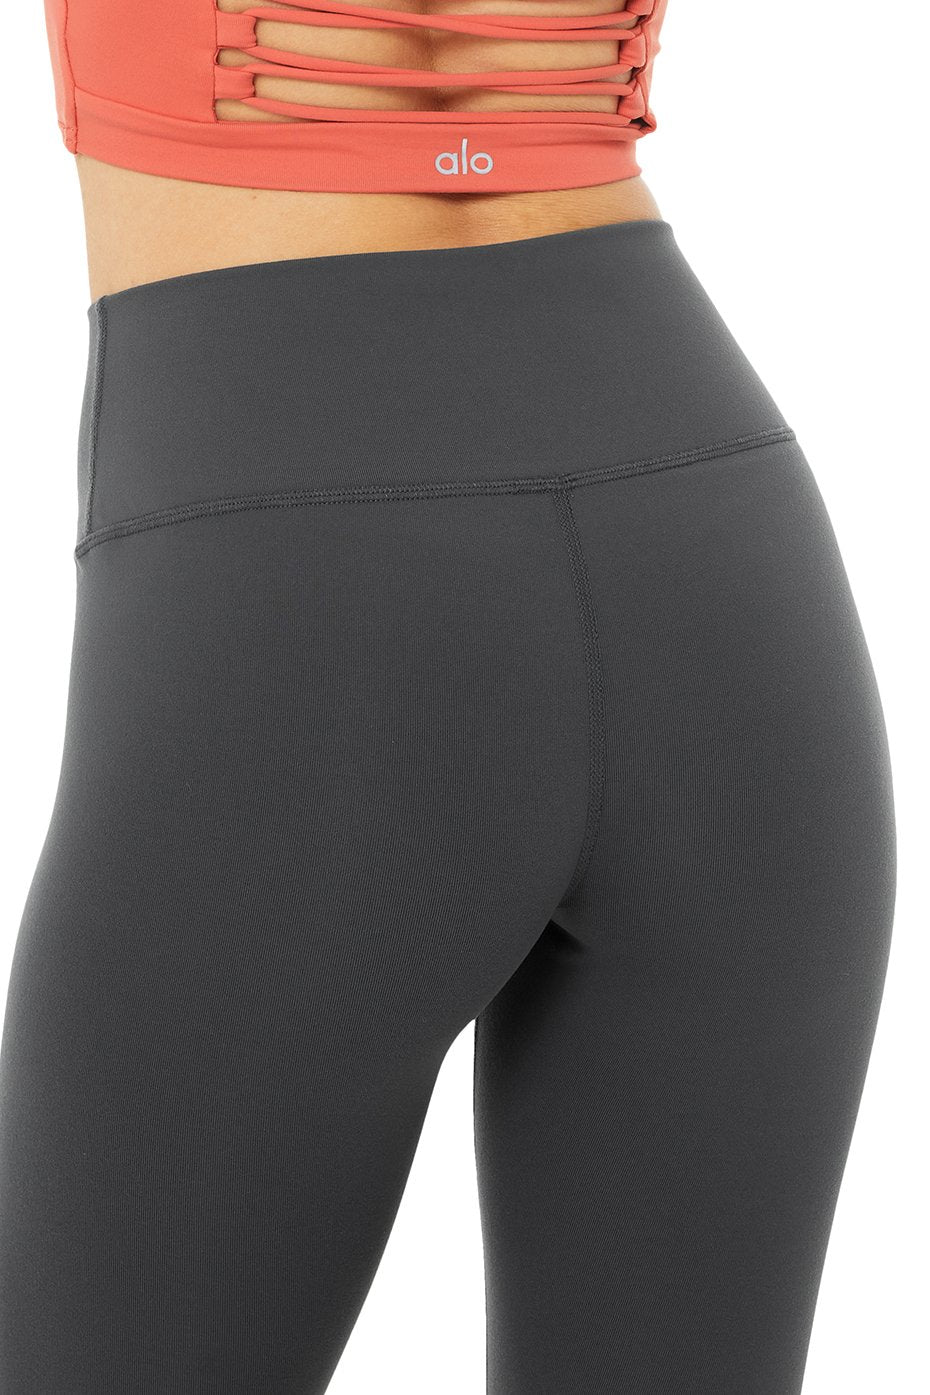 alo High Waisted Airbrush Legging Black Leather W5473SR - Free Shipping at  Largo Drive